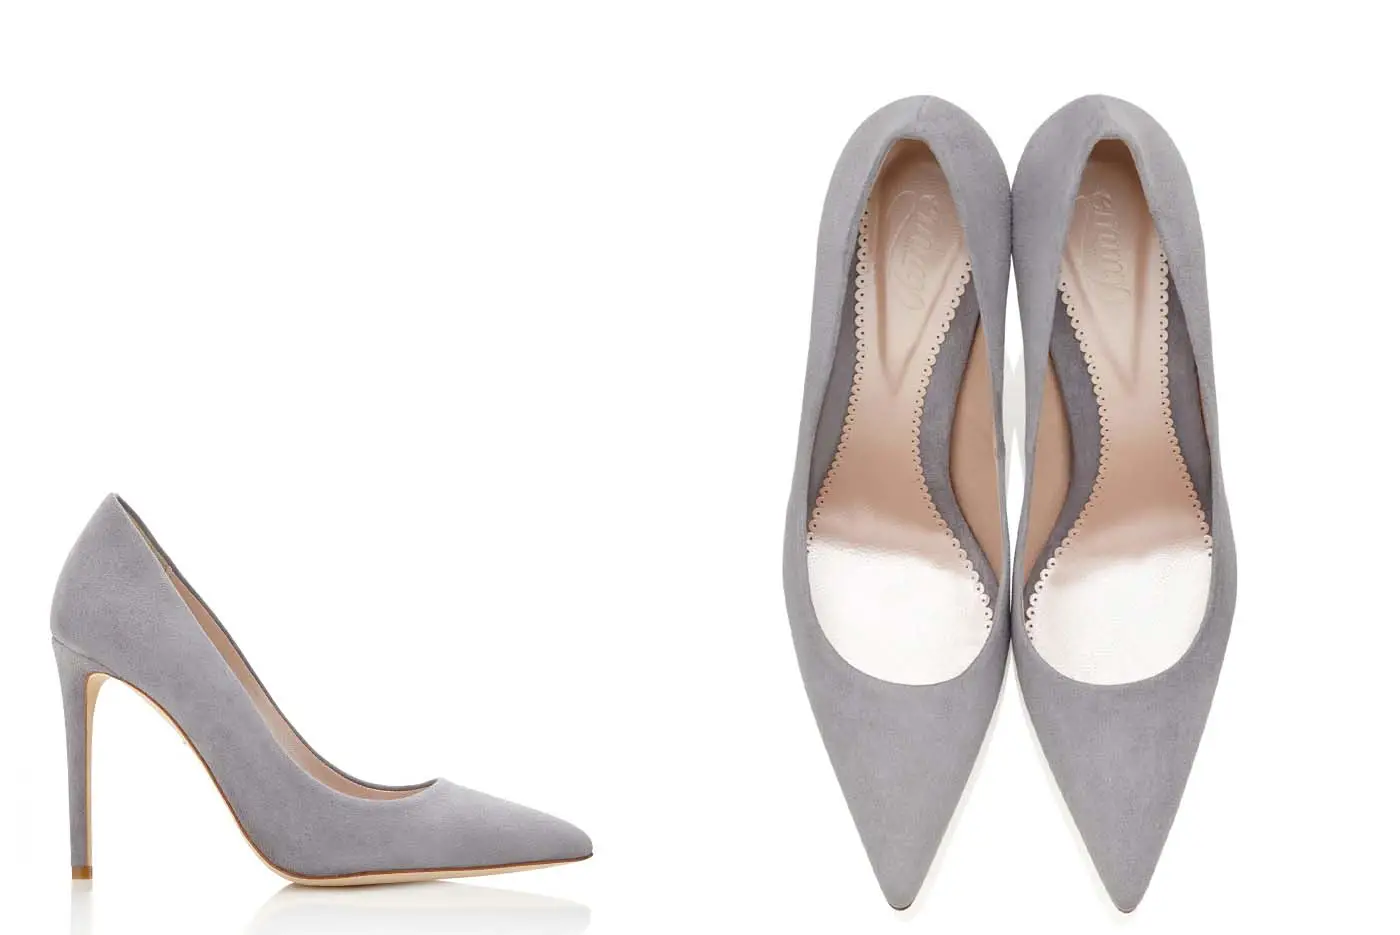 The Princess of Wales wore Emmy London Rebecca Steel Grey Pumps